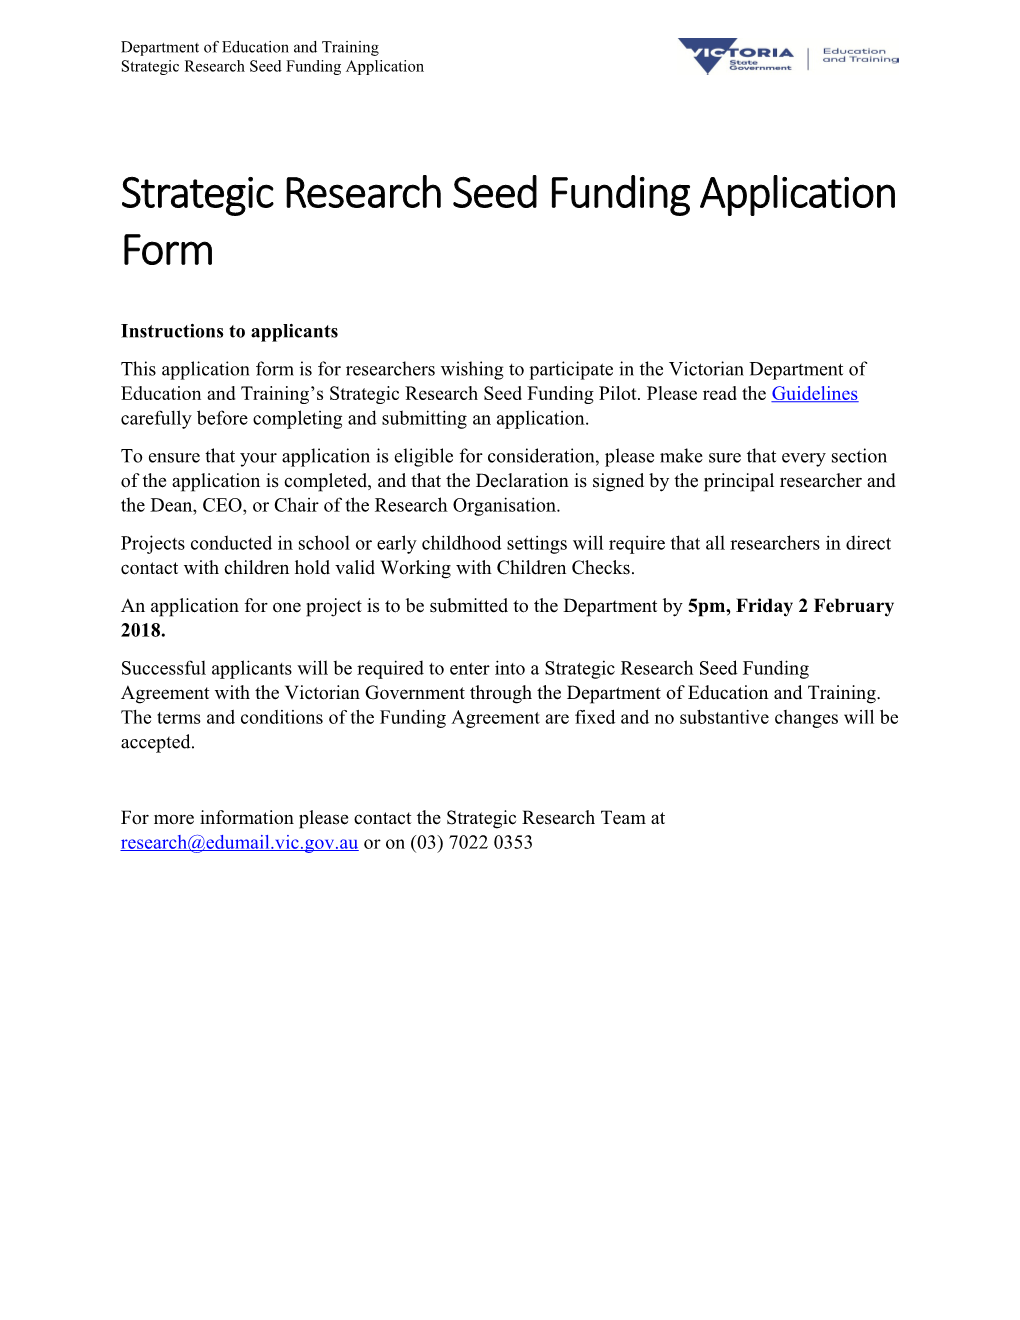 Strategic Research Seed Funding Application